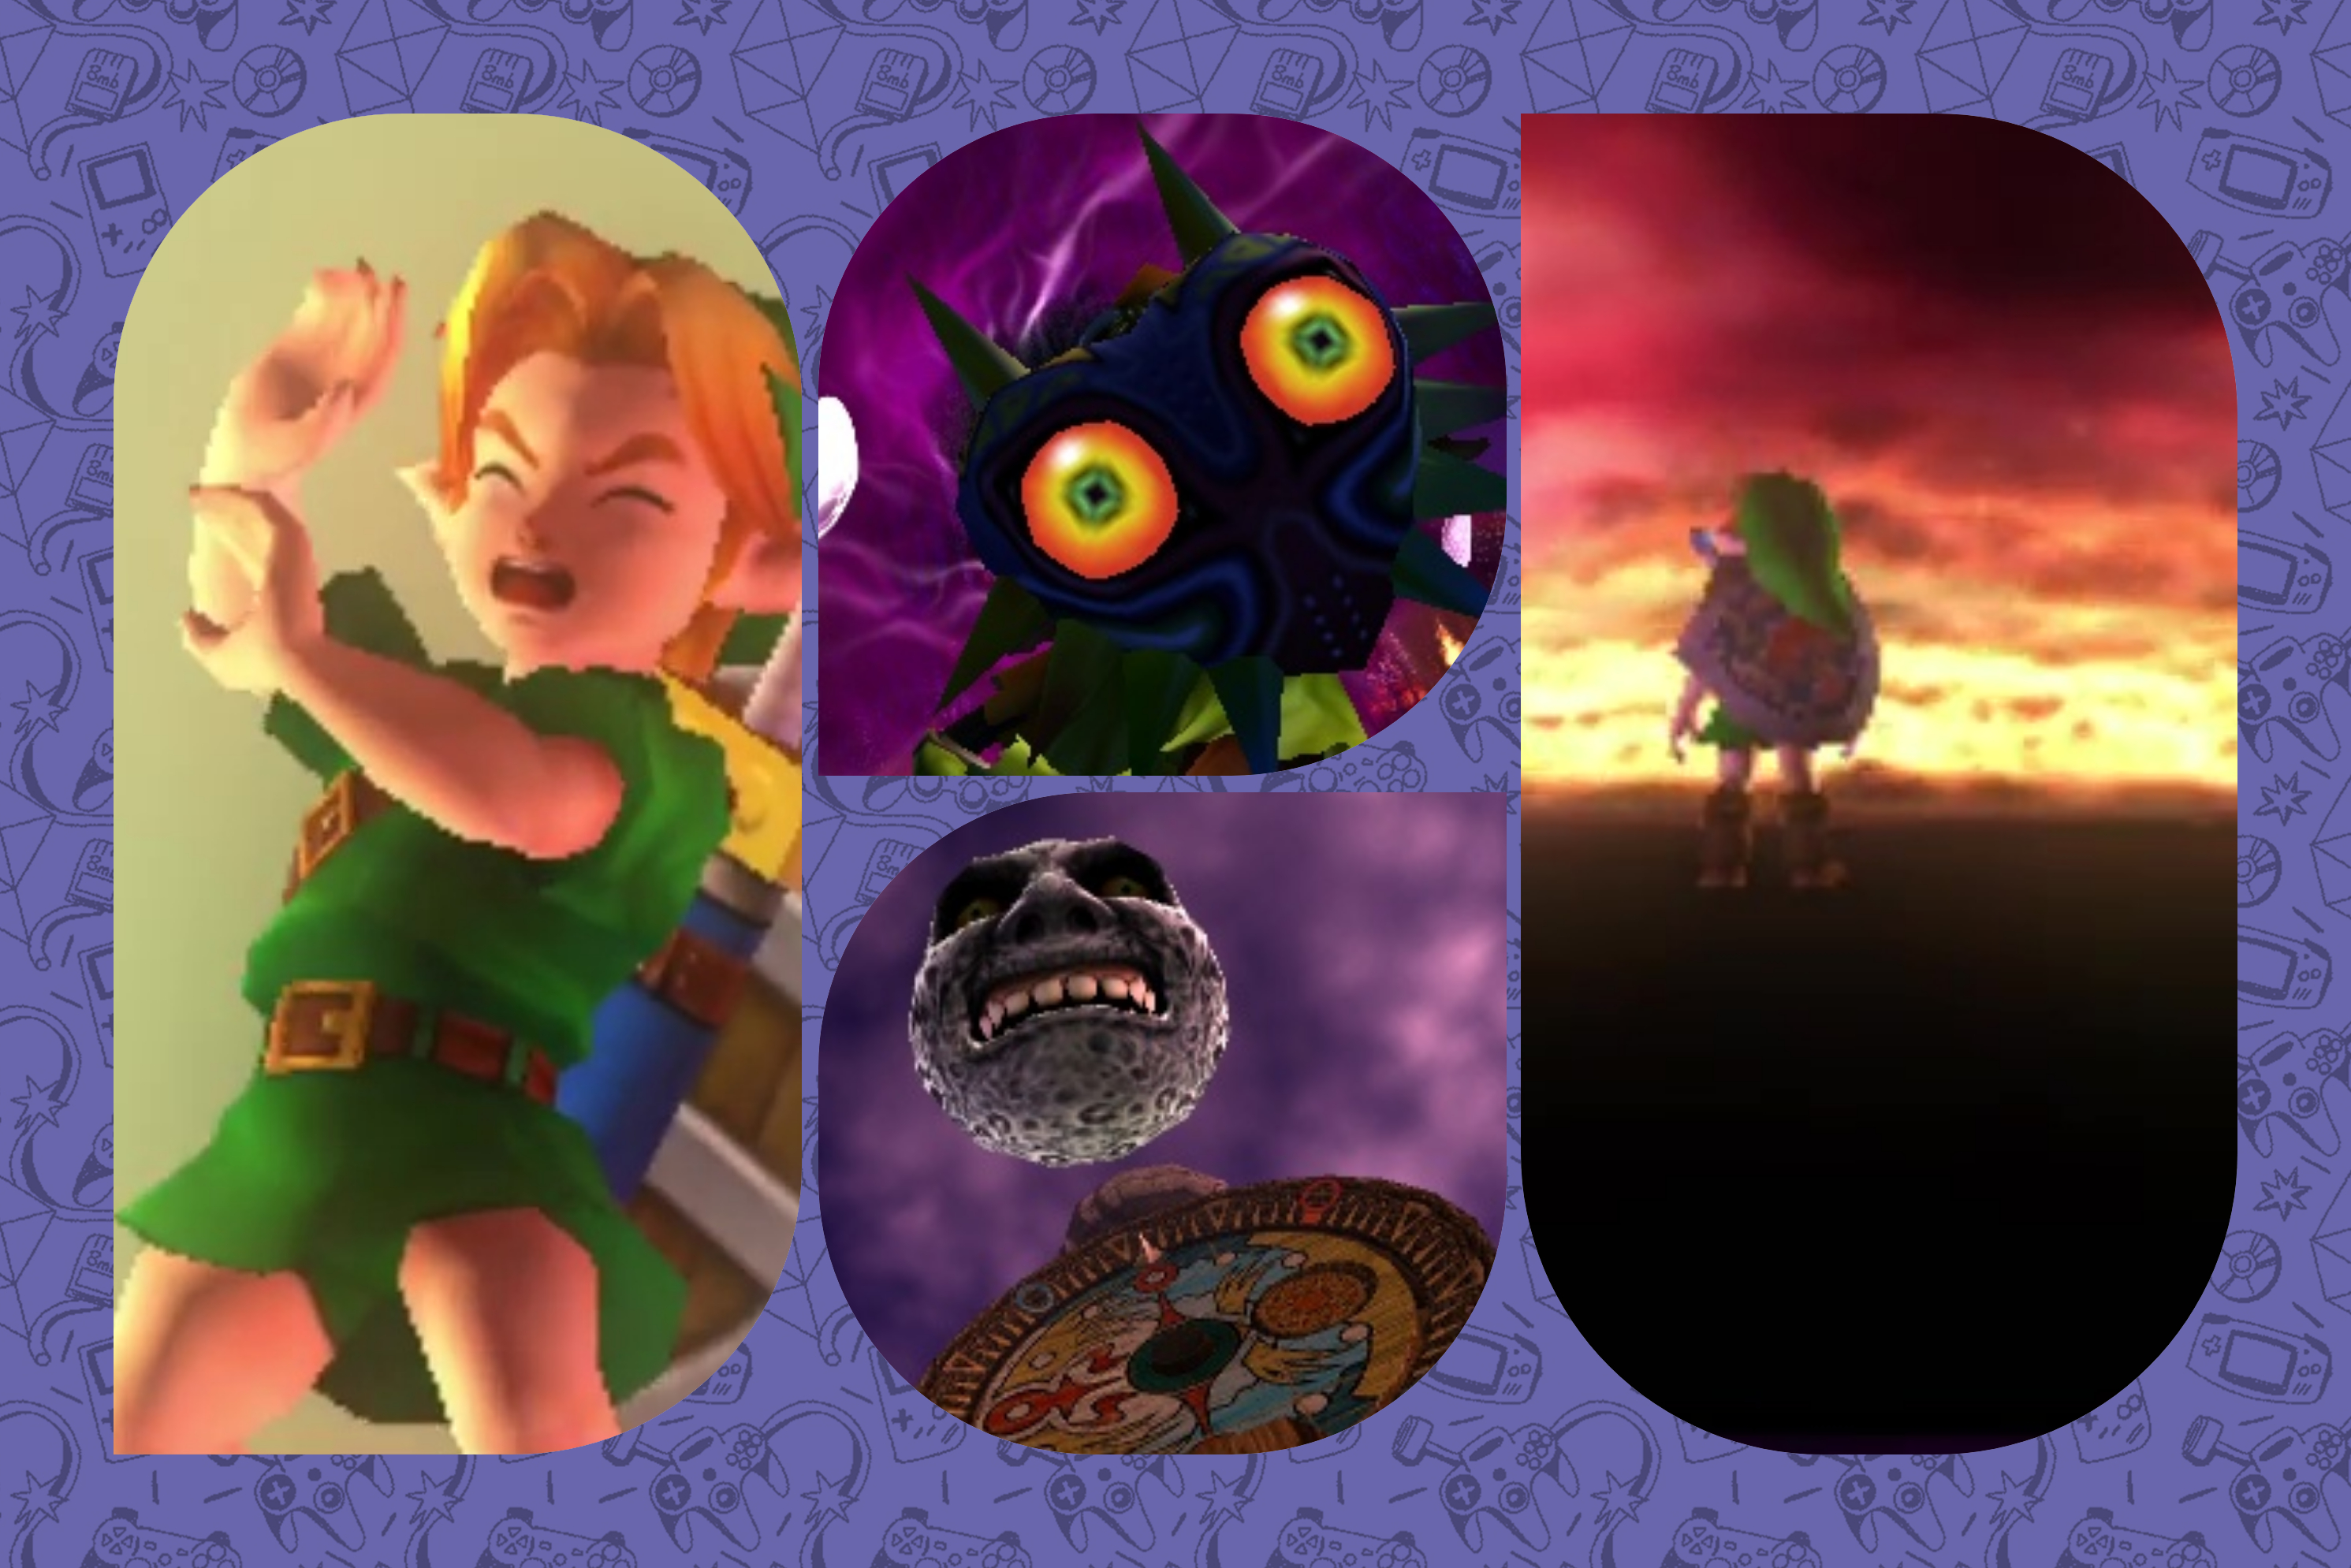 A graphic showing several screenshots from moments in The Legend of Zelda: Majora’s Mask. There are four images: One where Link is is being overwhelmed by a bright light, one showing the masked imp from Majora’s Mask, An image of the moon with a face hanging over the town, and an image of Link standing staring out towards a horizon. 